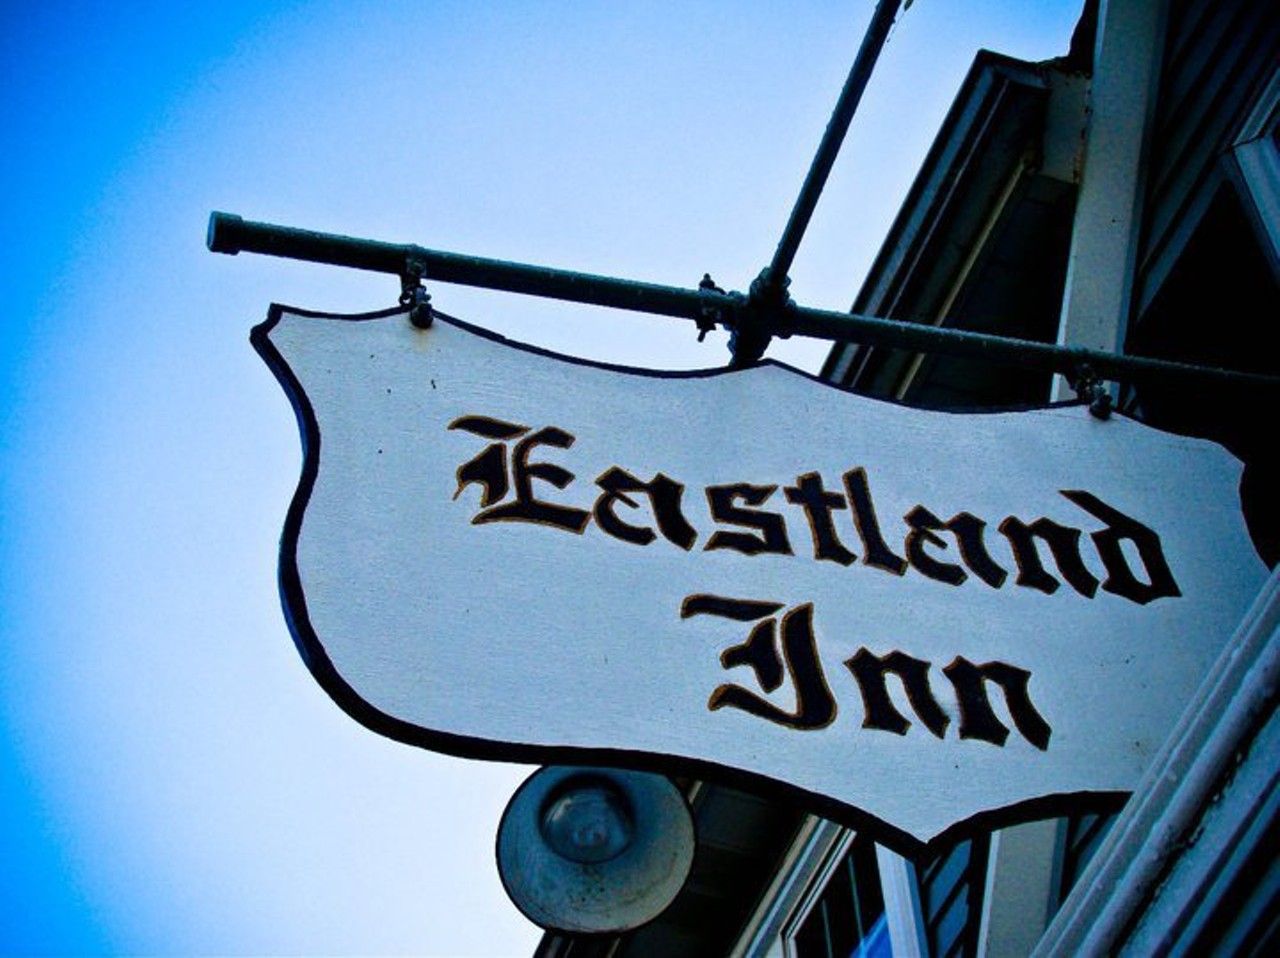 Eastland Inn Restaurant & Tavern - Just a stones throw from the Cuyahoga County Fairgrounds is the Eastland Inn Restaurant & Tavern. With over 75 years of services the Berea community, they have had plenty of time to perfect thier delicous fish fry. Pay them a visit at 33 Eastland Rd.